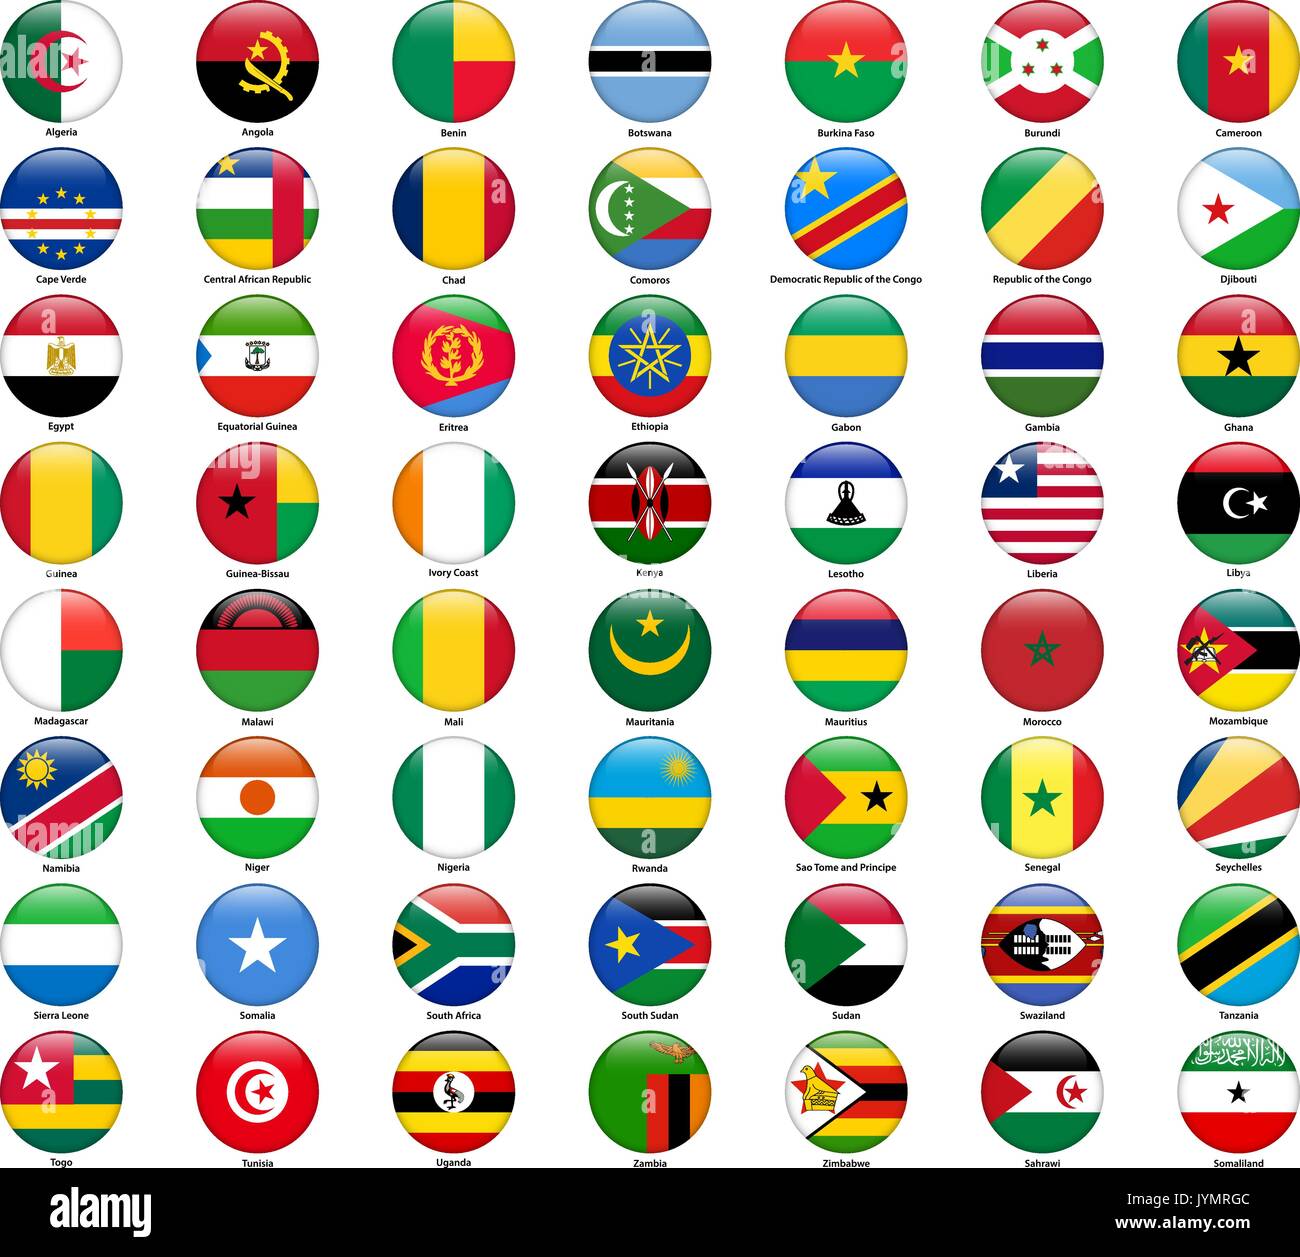 African Countries With Their Flags